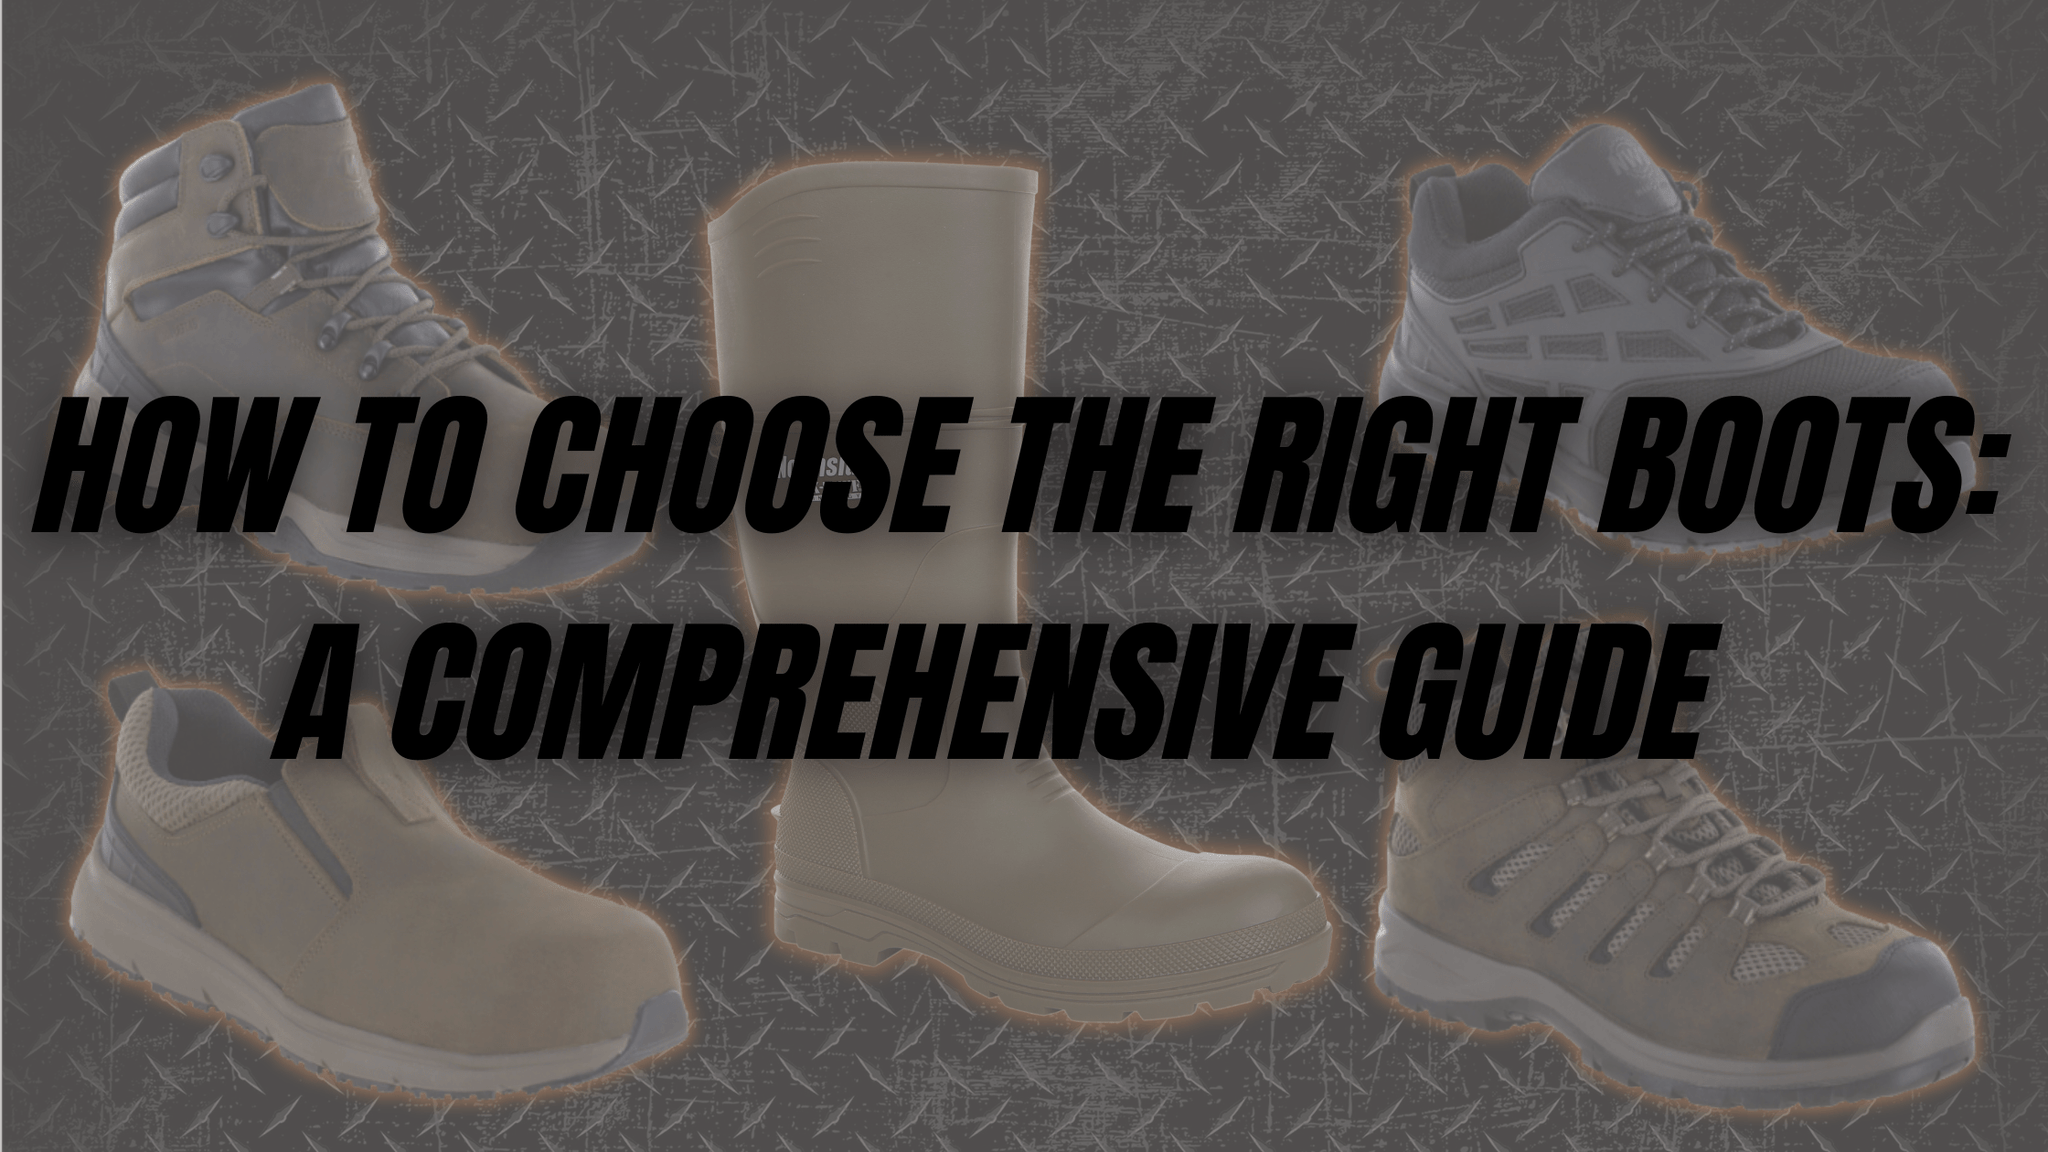 How to Choose the Right Work Boots: A Comprehensive Guide